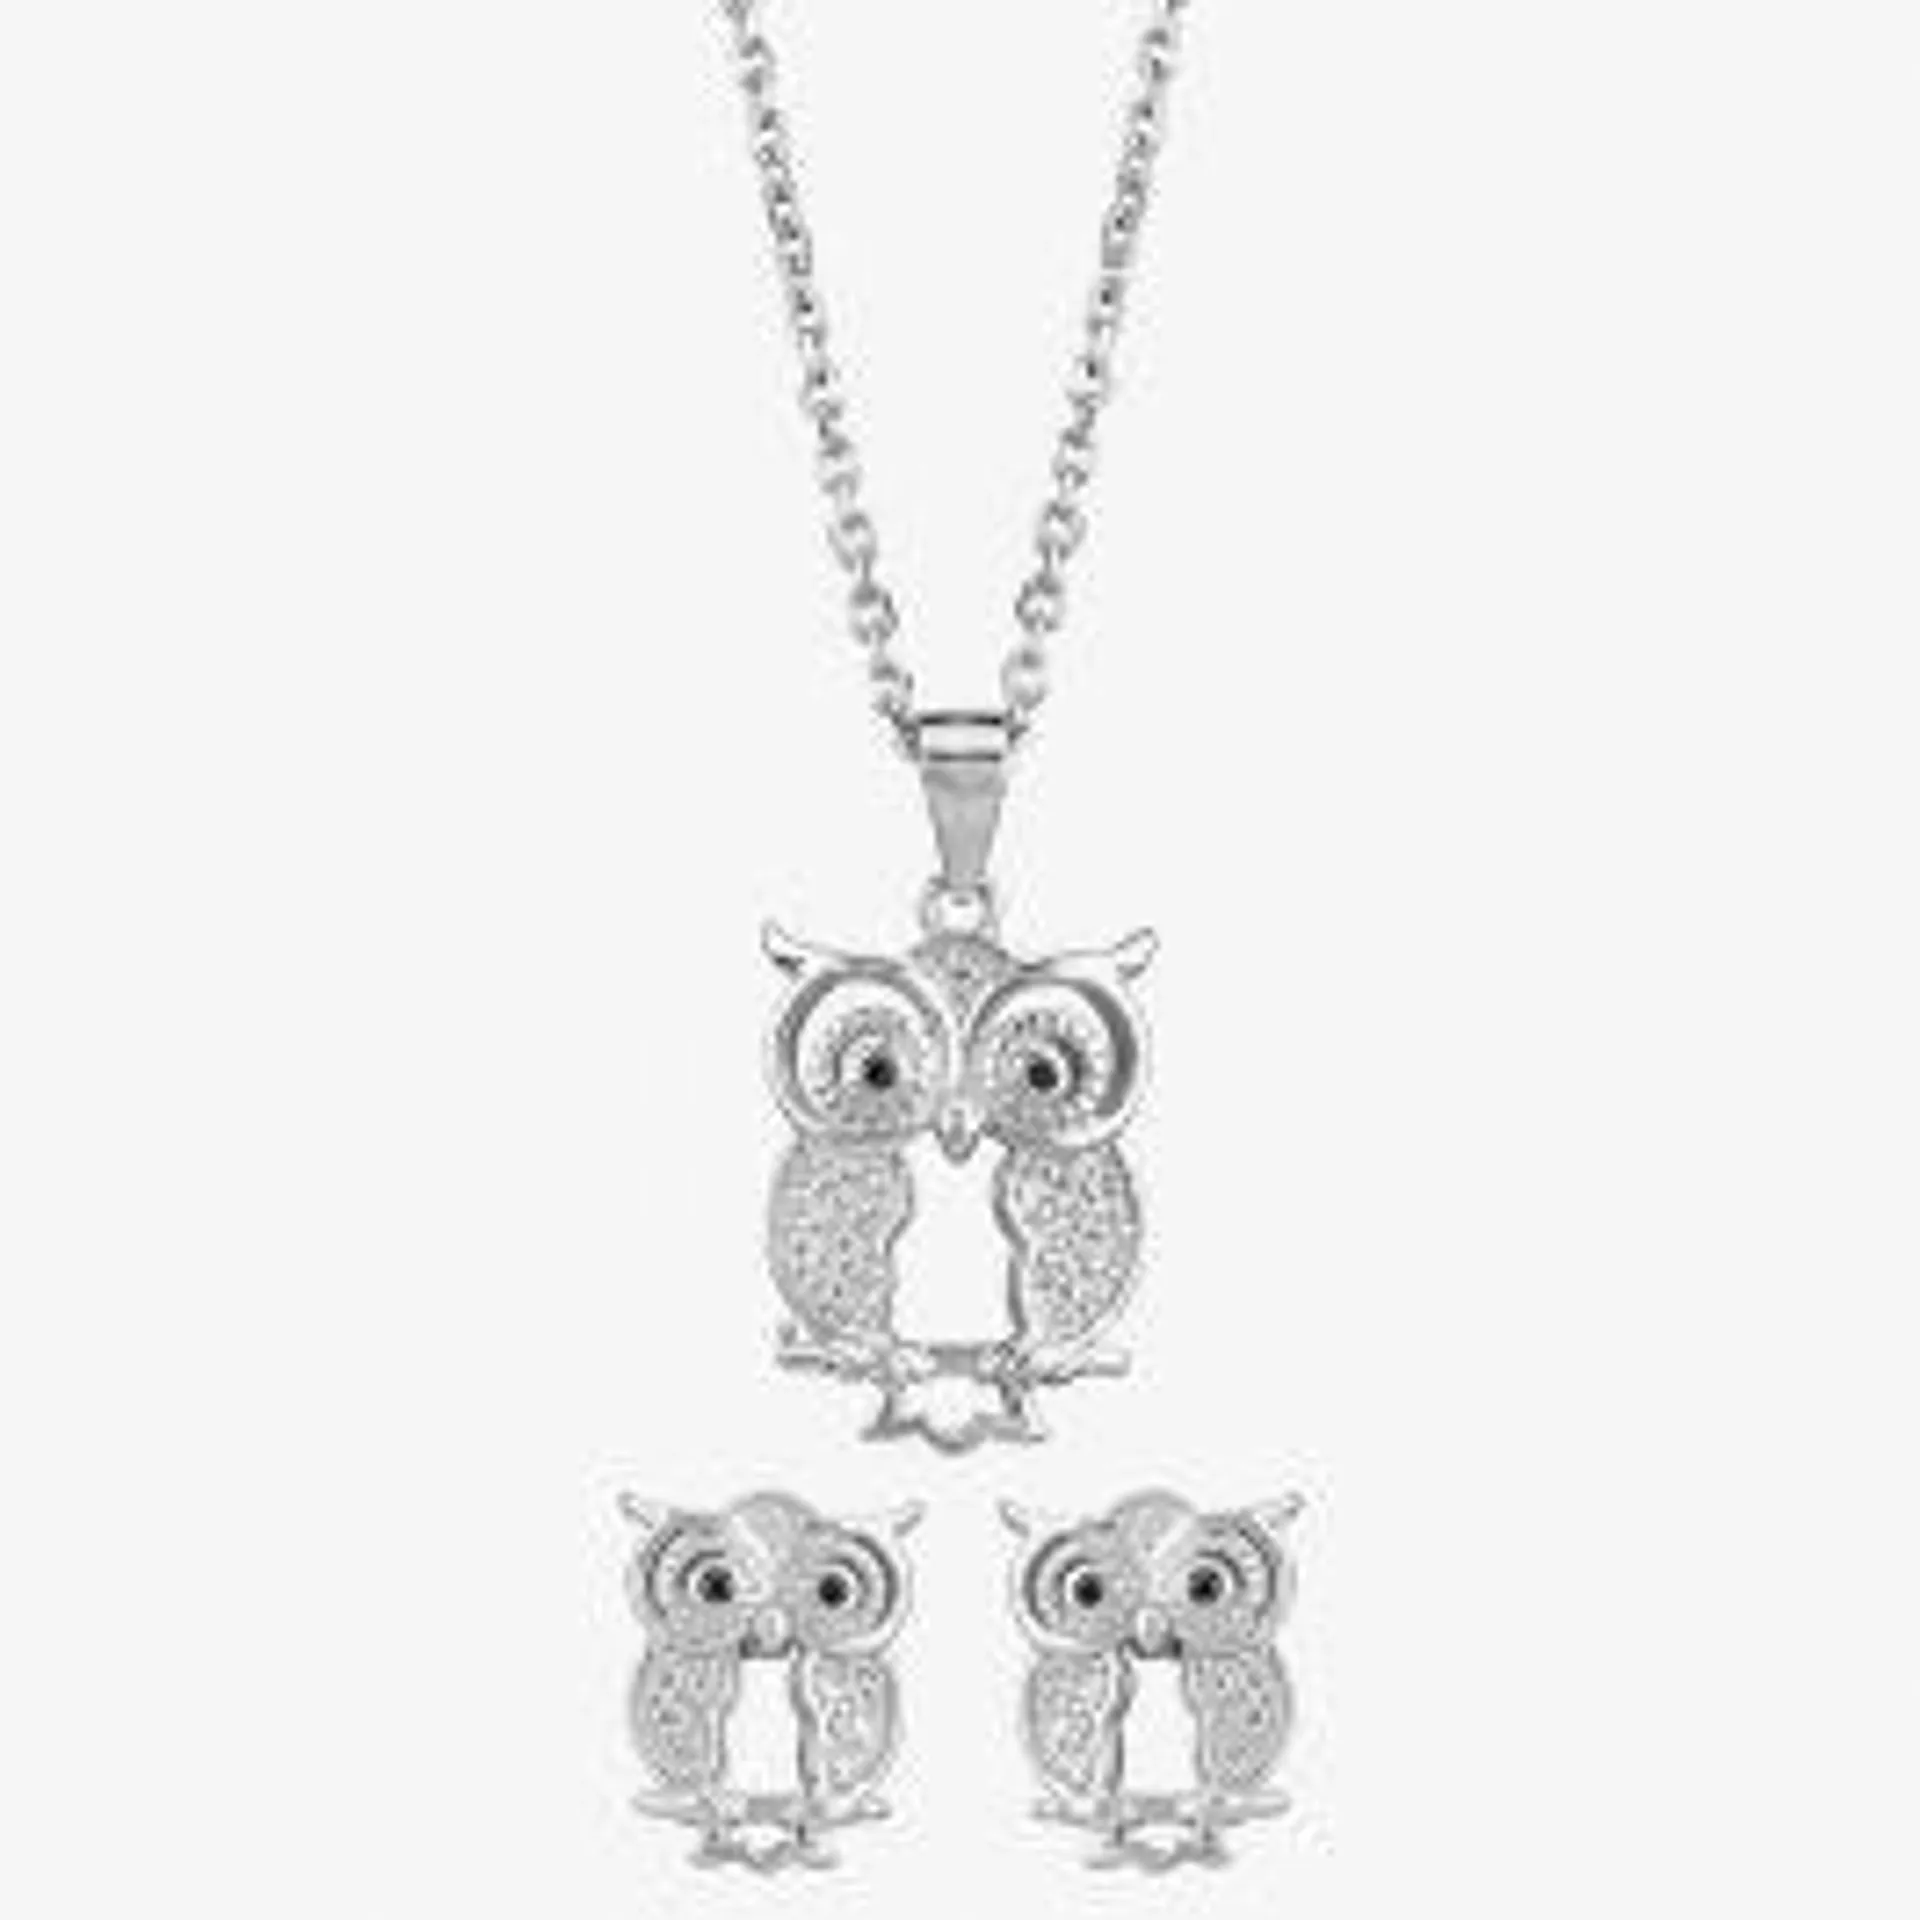 Silver Cubic Zirconia Owl Pendant and Earring Set E615090+P614130